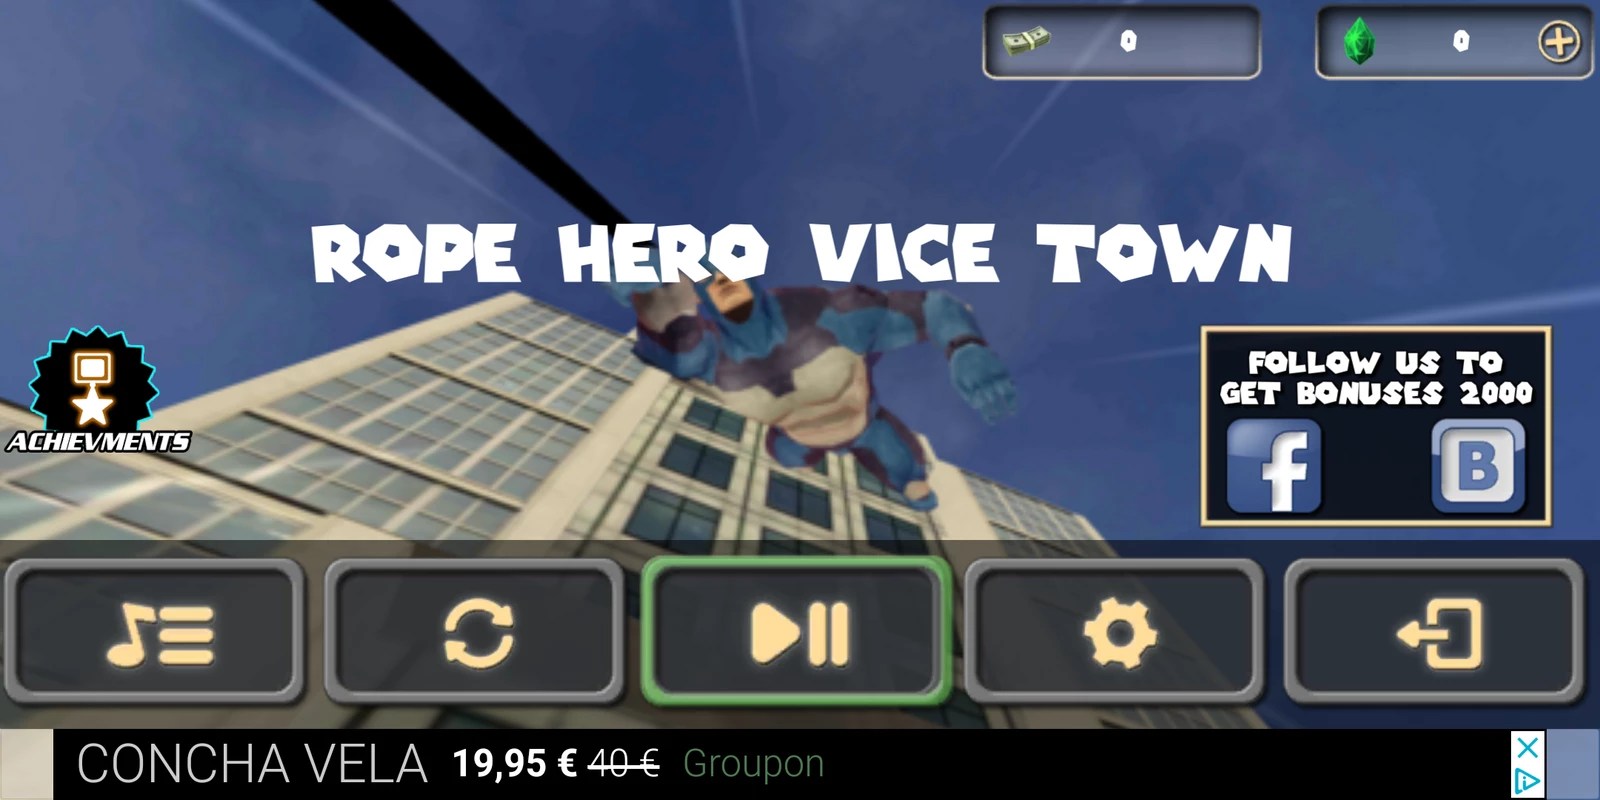 Rope Hero Vice Town 6.7.0 APK for Android Screenshot 6